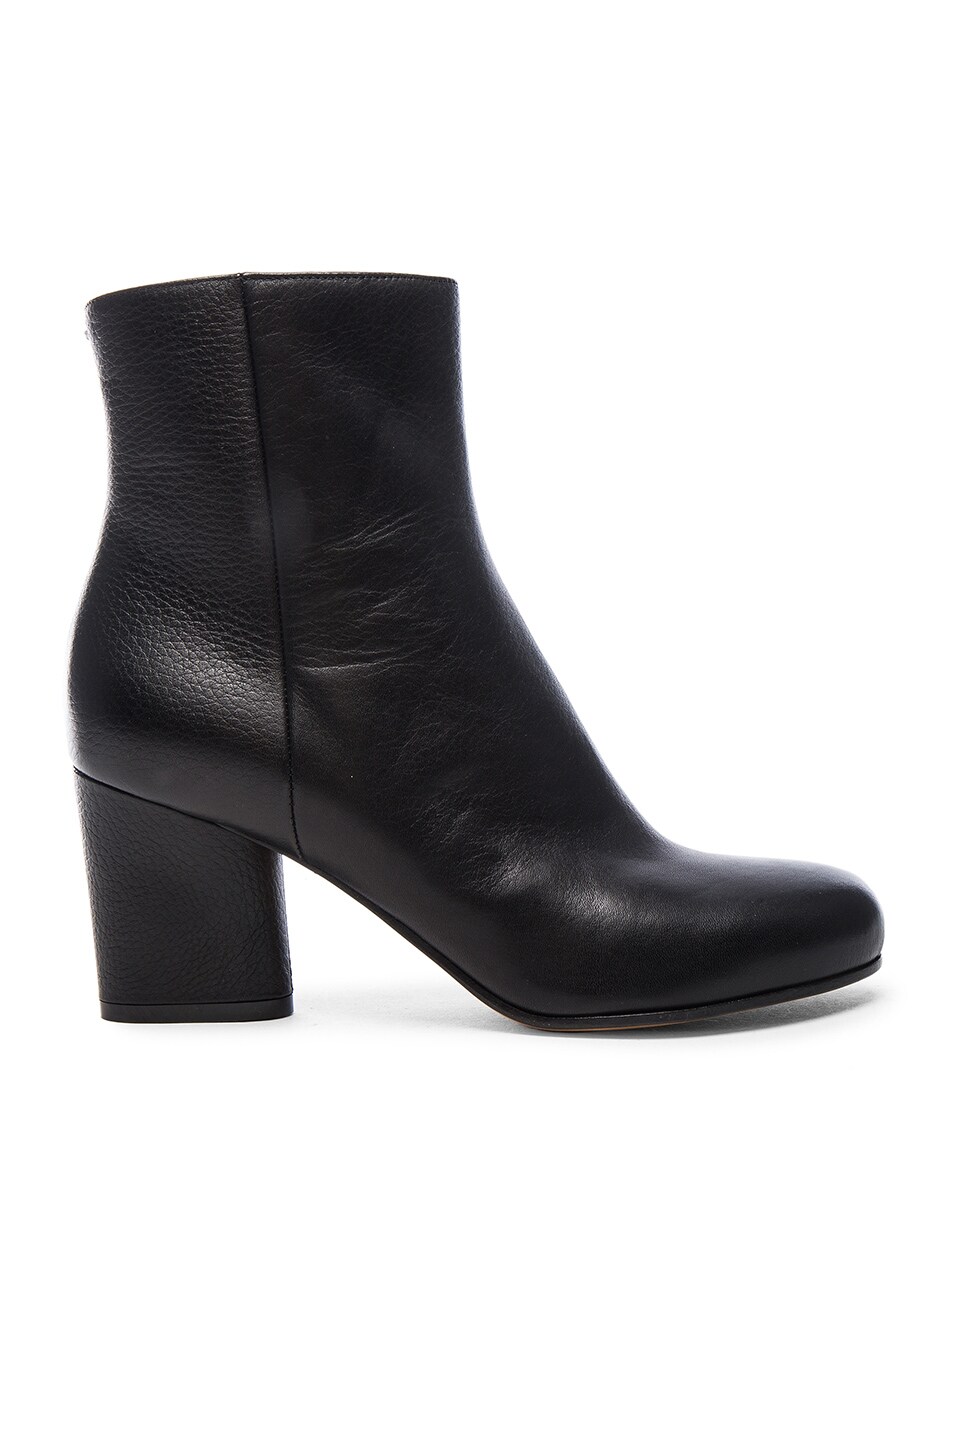 Image 1 of Maison Margiela Embossed Leather Booties in Black